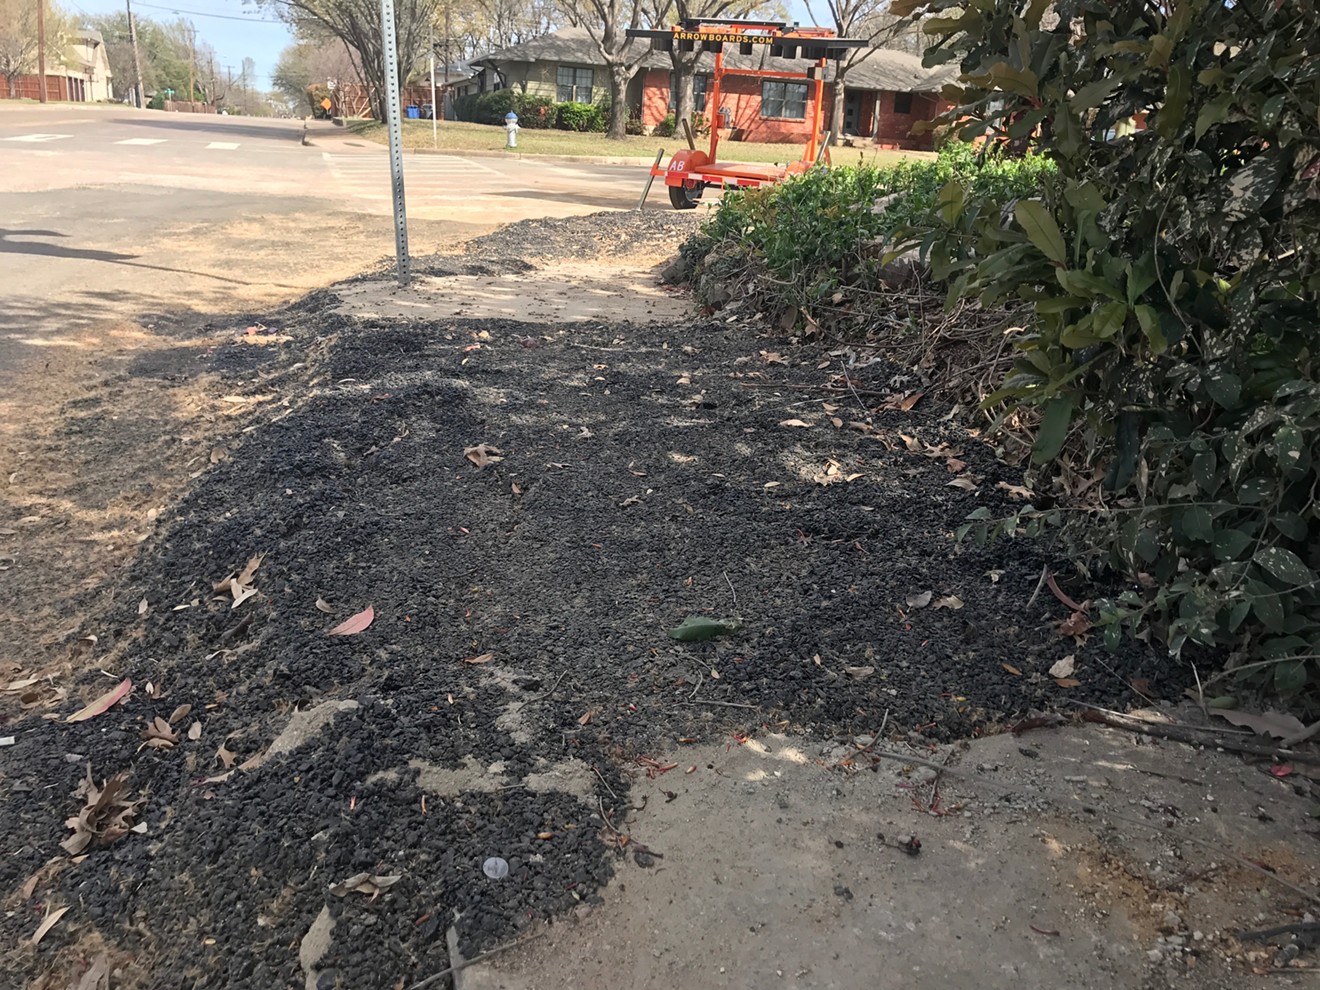 Crews replacing gas lines left behind a fast patch on Merrell Road. Atmos will be responsible for putting the streets back in order once gas service is restored to nearly 3,000 homes in Northwest Dallas.